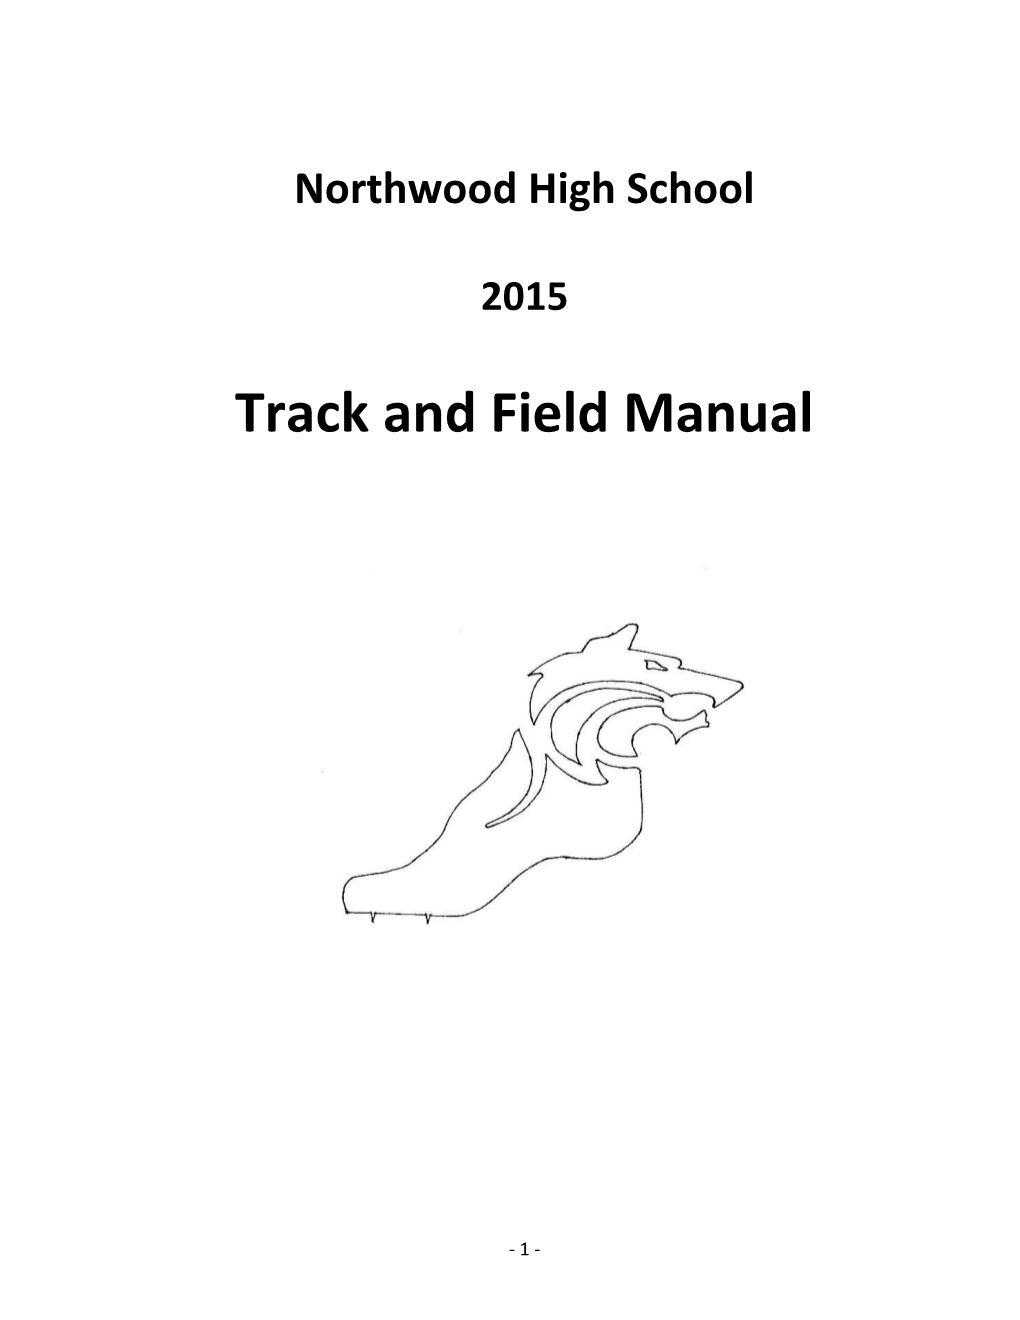 Track and Field Manual